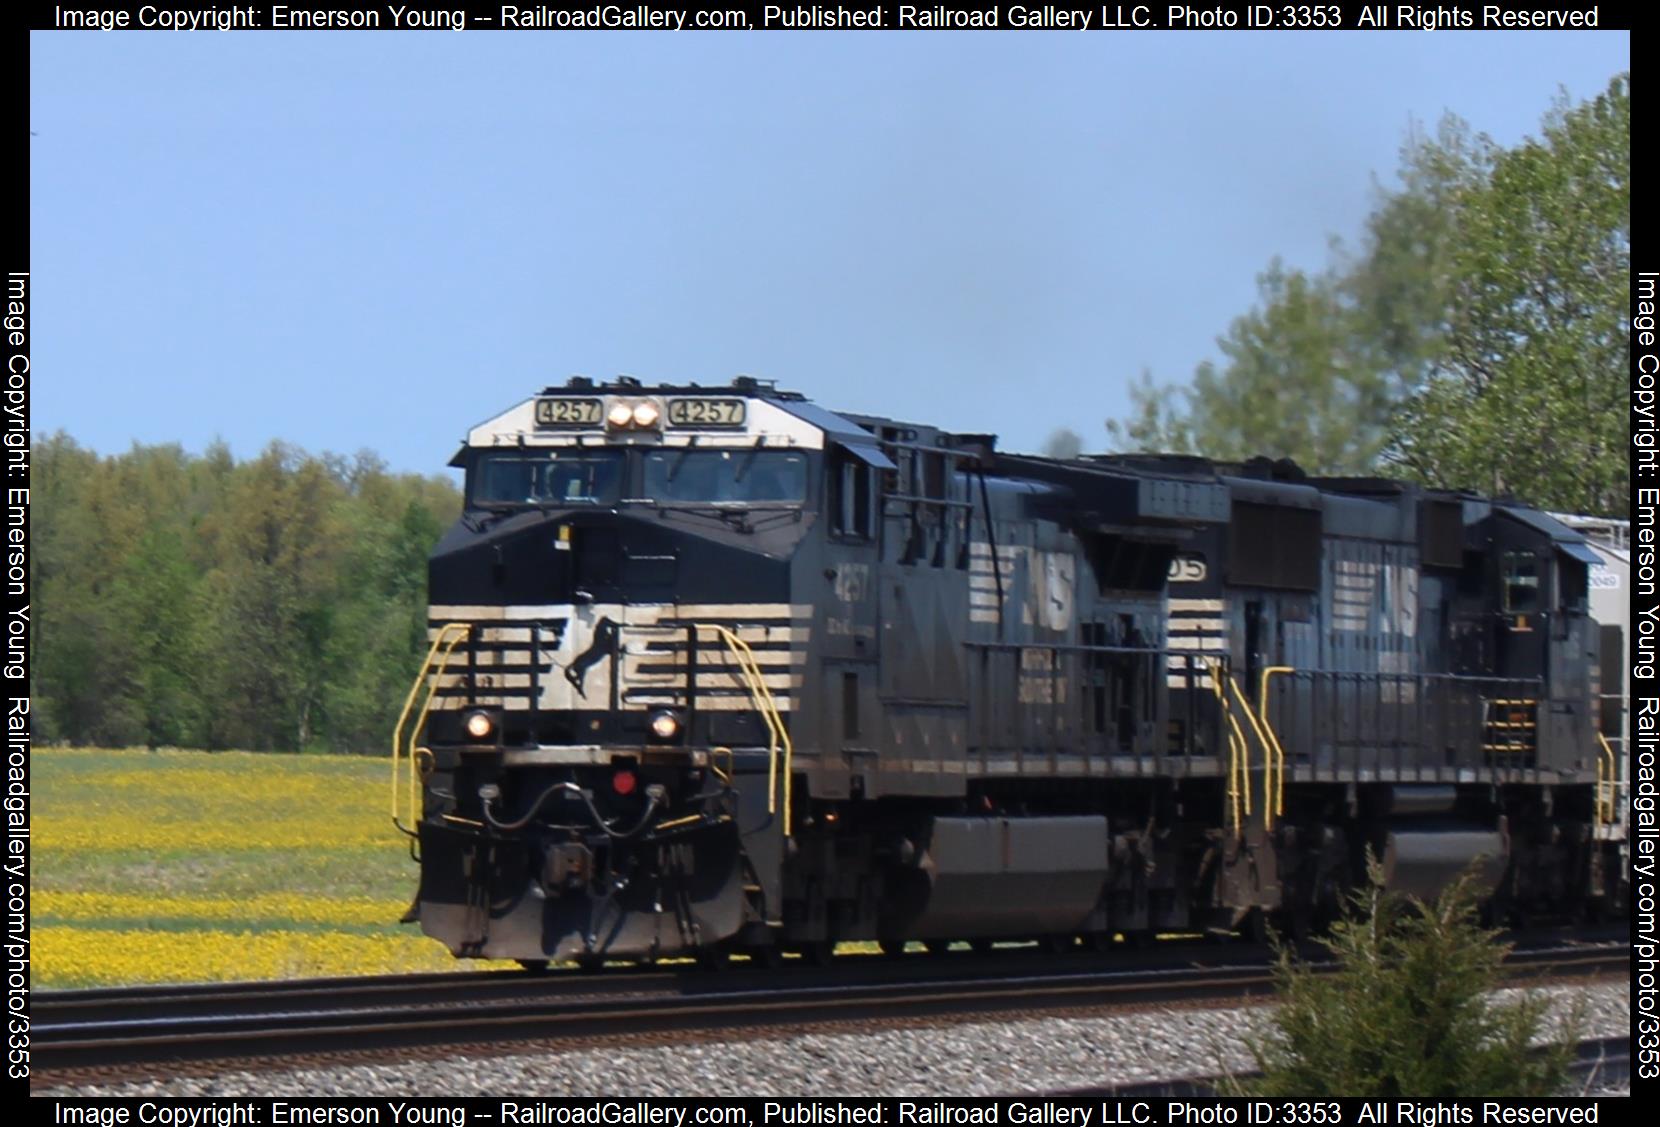 NS 4257 is a class GE AC4400CW and  is pictured in Attica, Ohio, United States.  This was taken along the Sandusky District  on the Norfolk Southern. Photo Copyright: Emerson Young uploaded to Railroad Gallery on 05/04/2024. This photograph of NS 4257 was taken on Thursday, May 02, 2024. All Rights Reserved. 